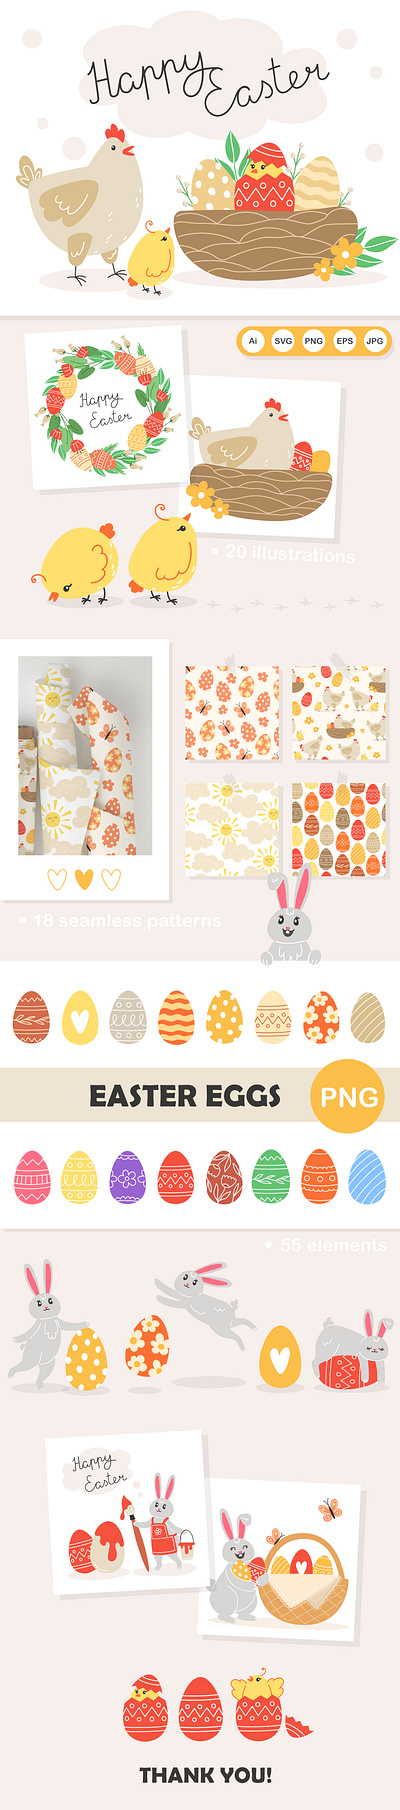 Big Easter Clipart for Creative Market clipart cute easter flat graphic design illustration vector